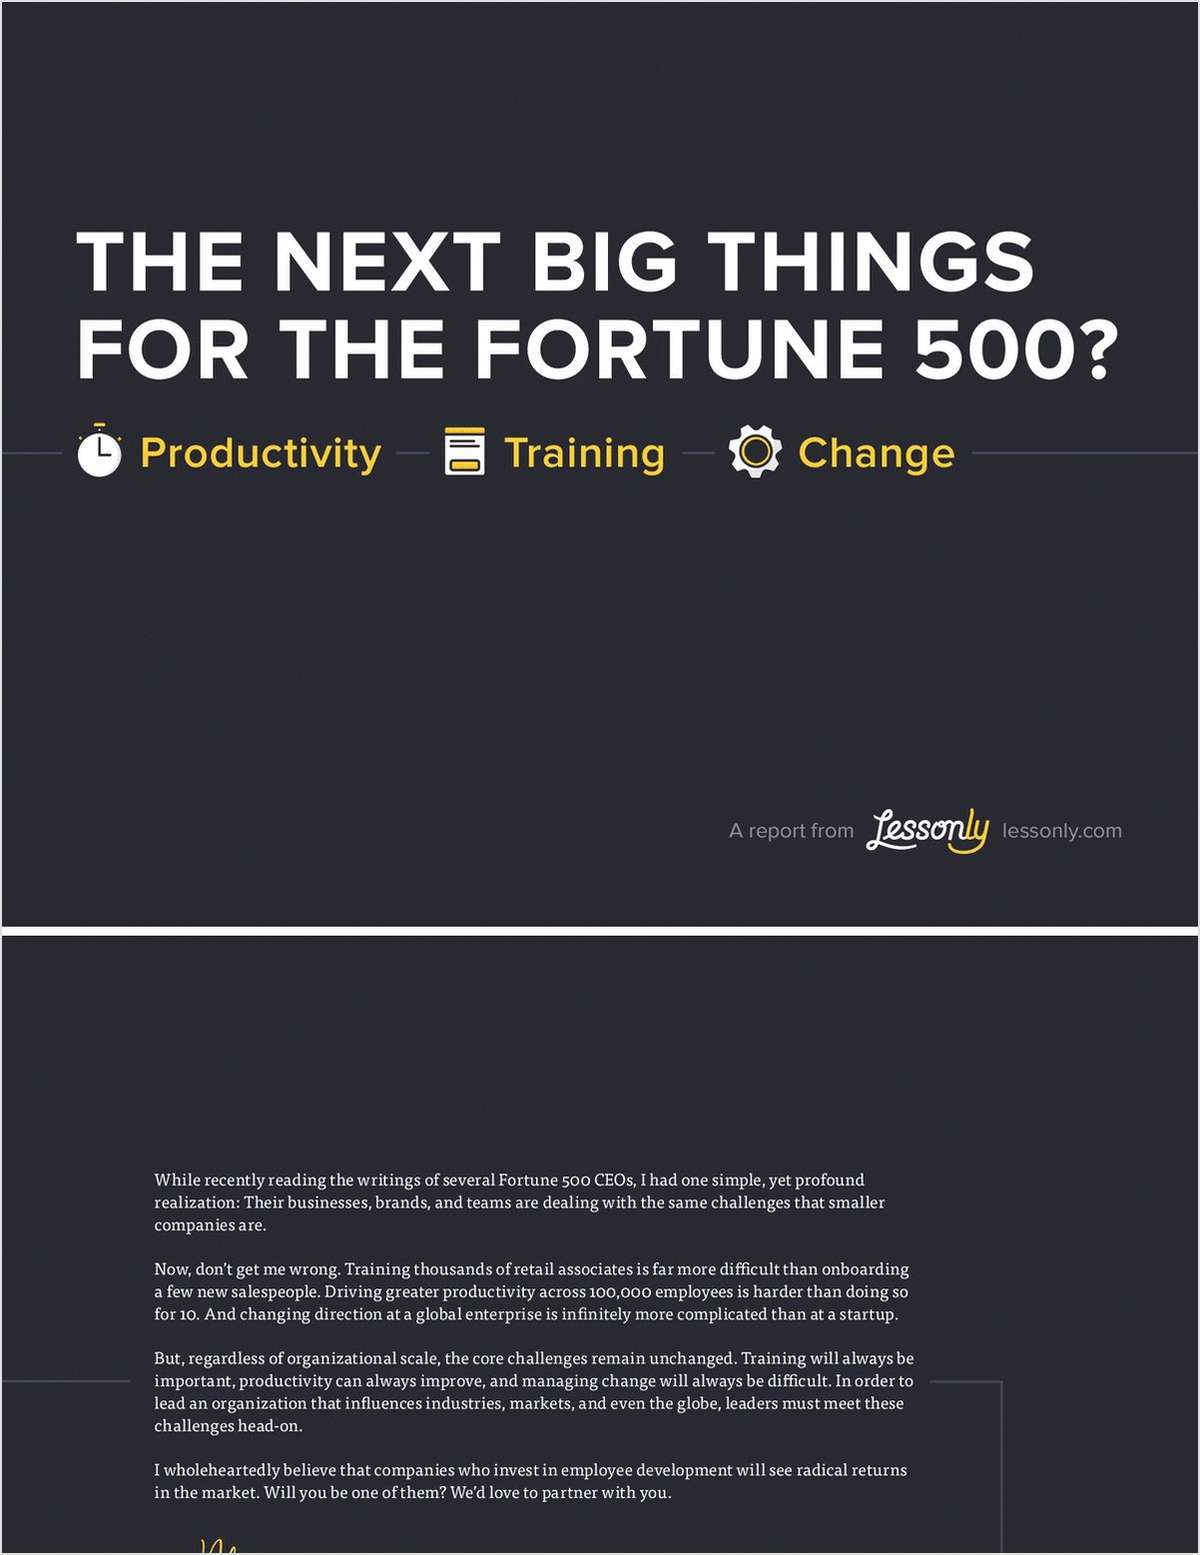 The Next Big Things for the Fortune 500?